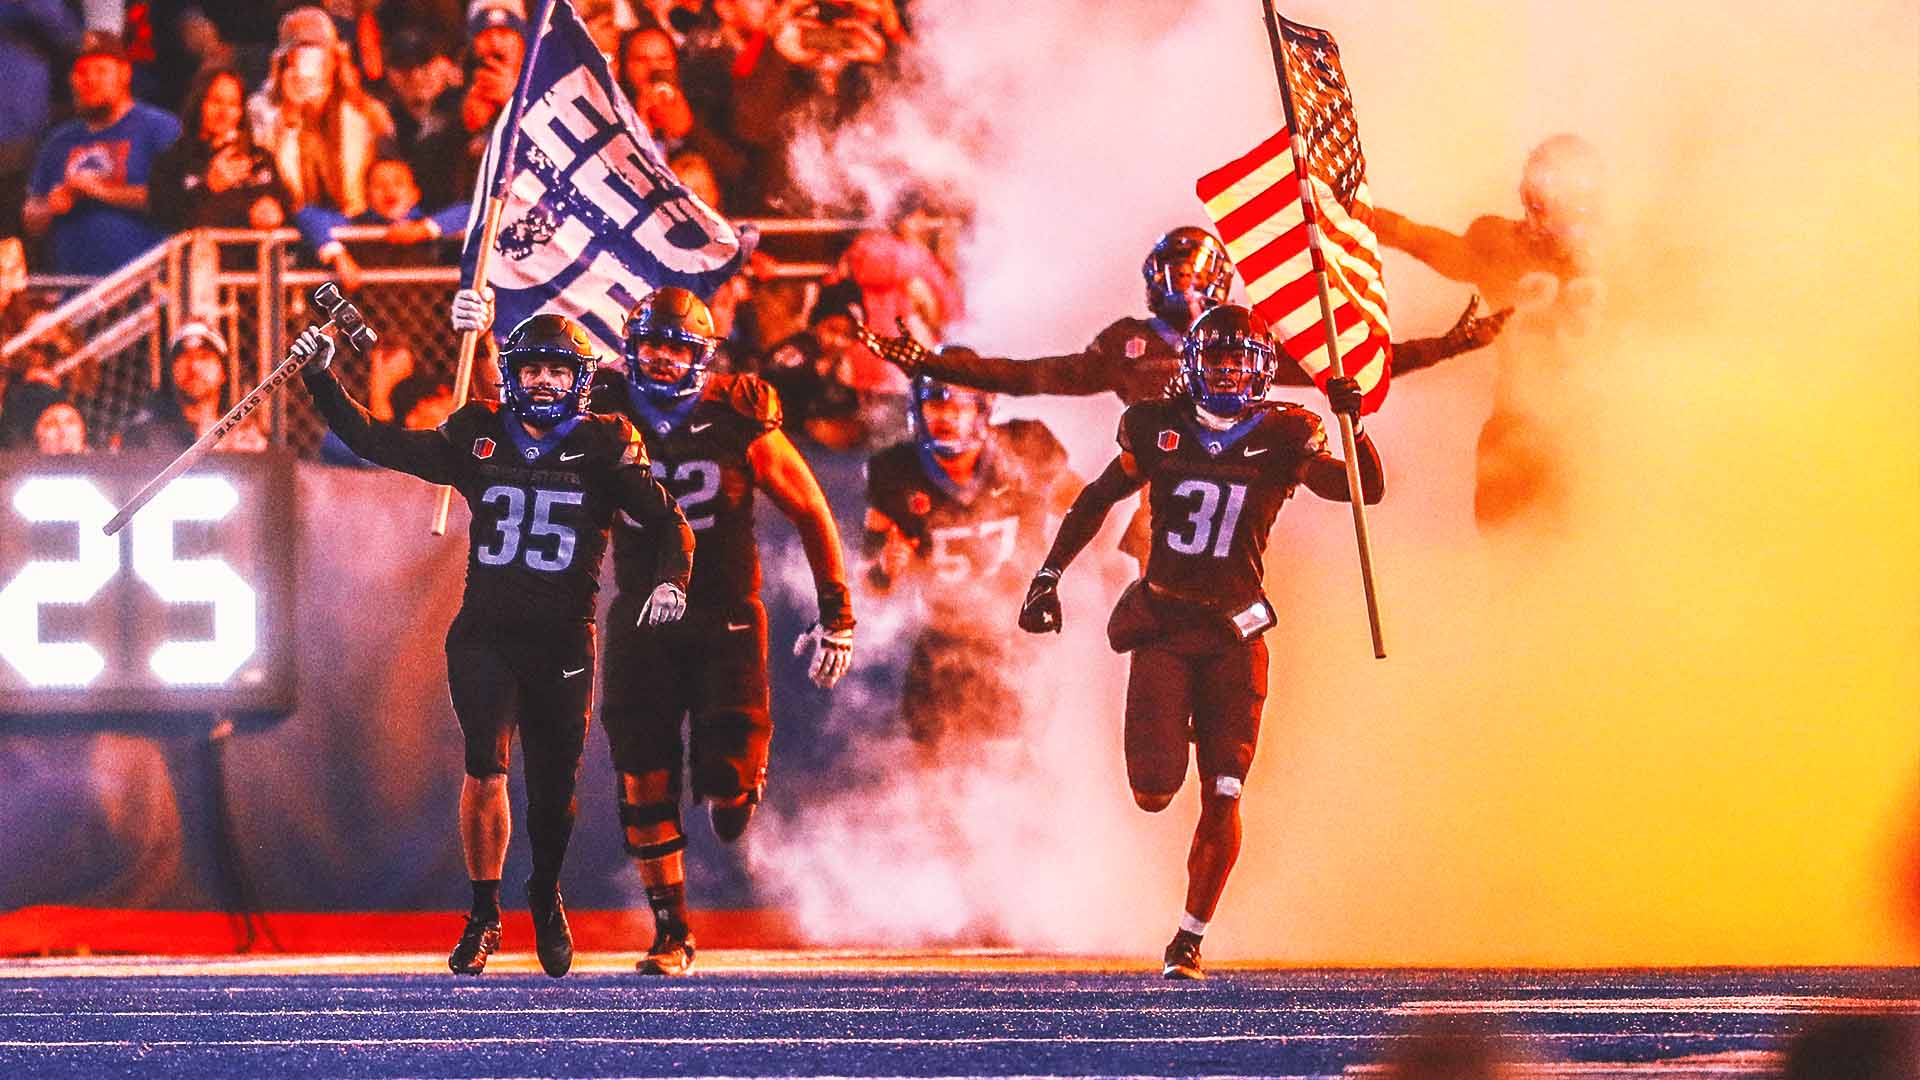 Computer breaks 3-way tie: Boise State to face UNLV for Mountain West title